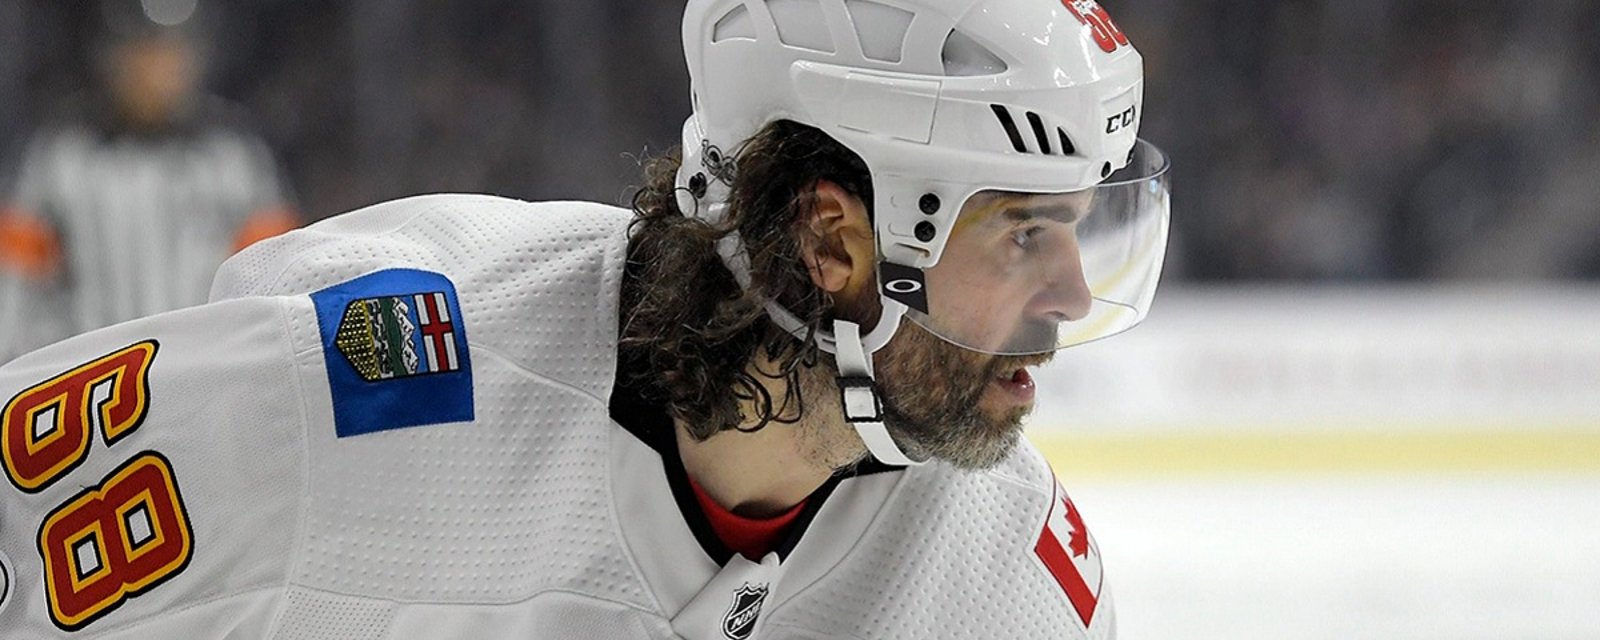 Breaking: Jagr may be paired up with Calgary's top two stars.